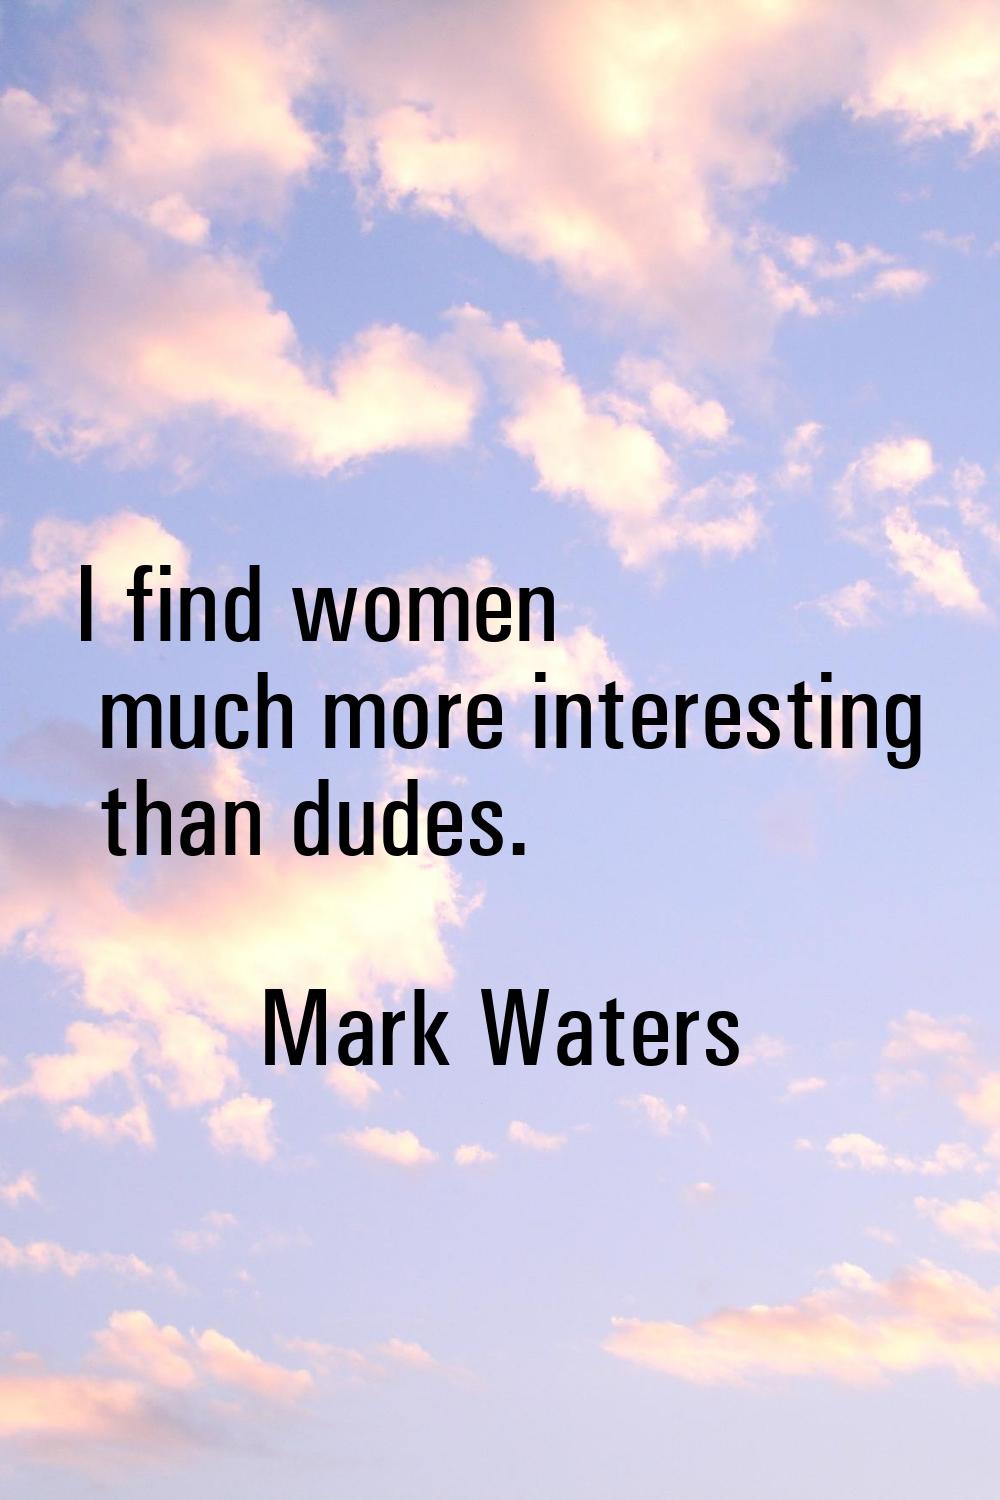 I find women much more interesting than dudes.